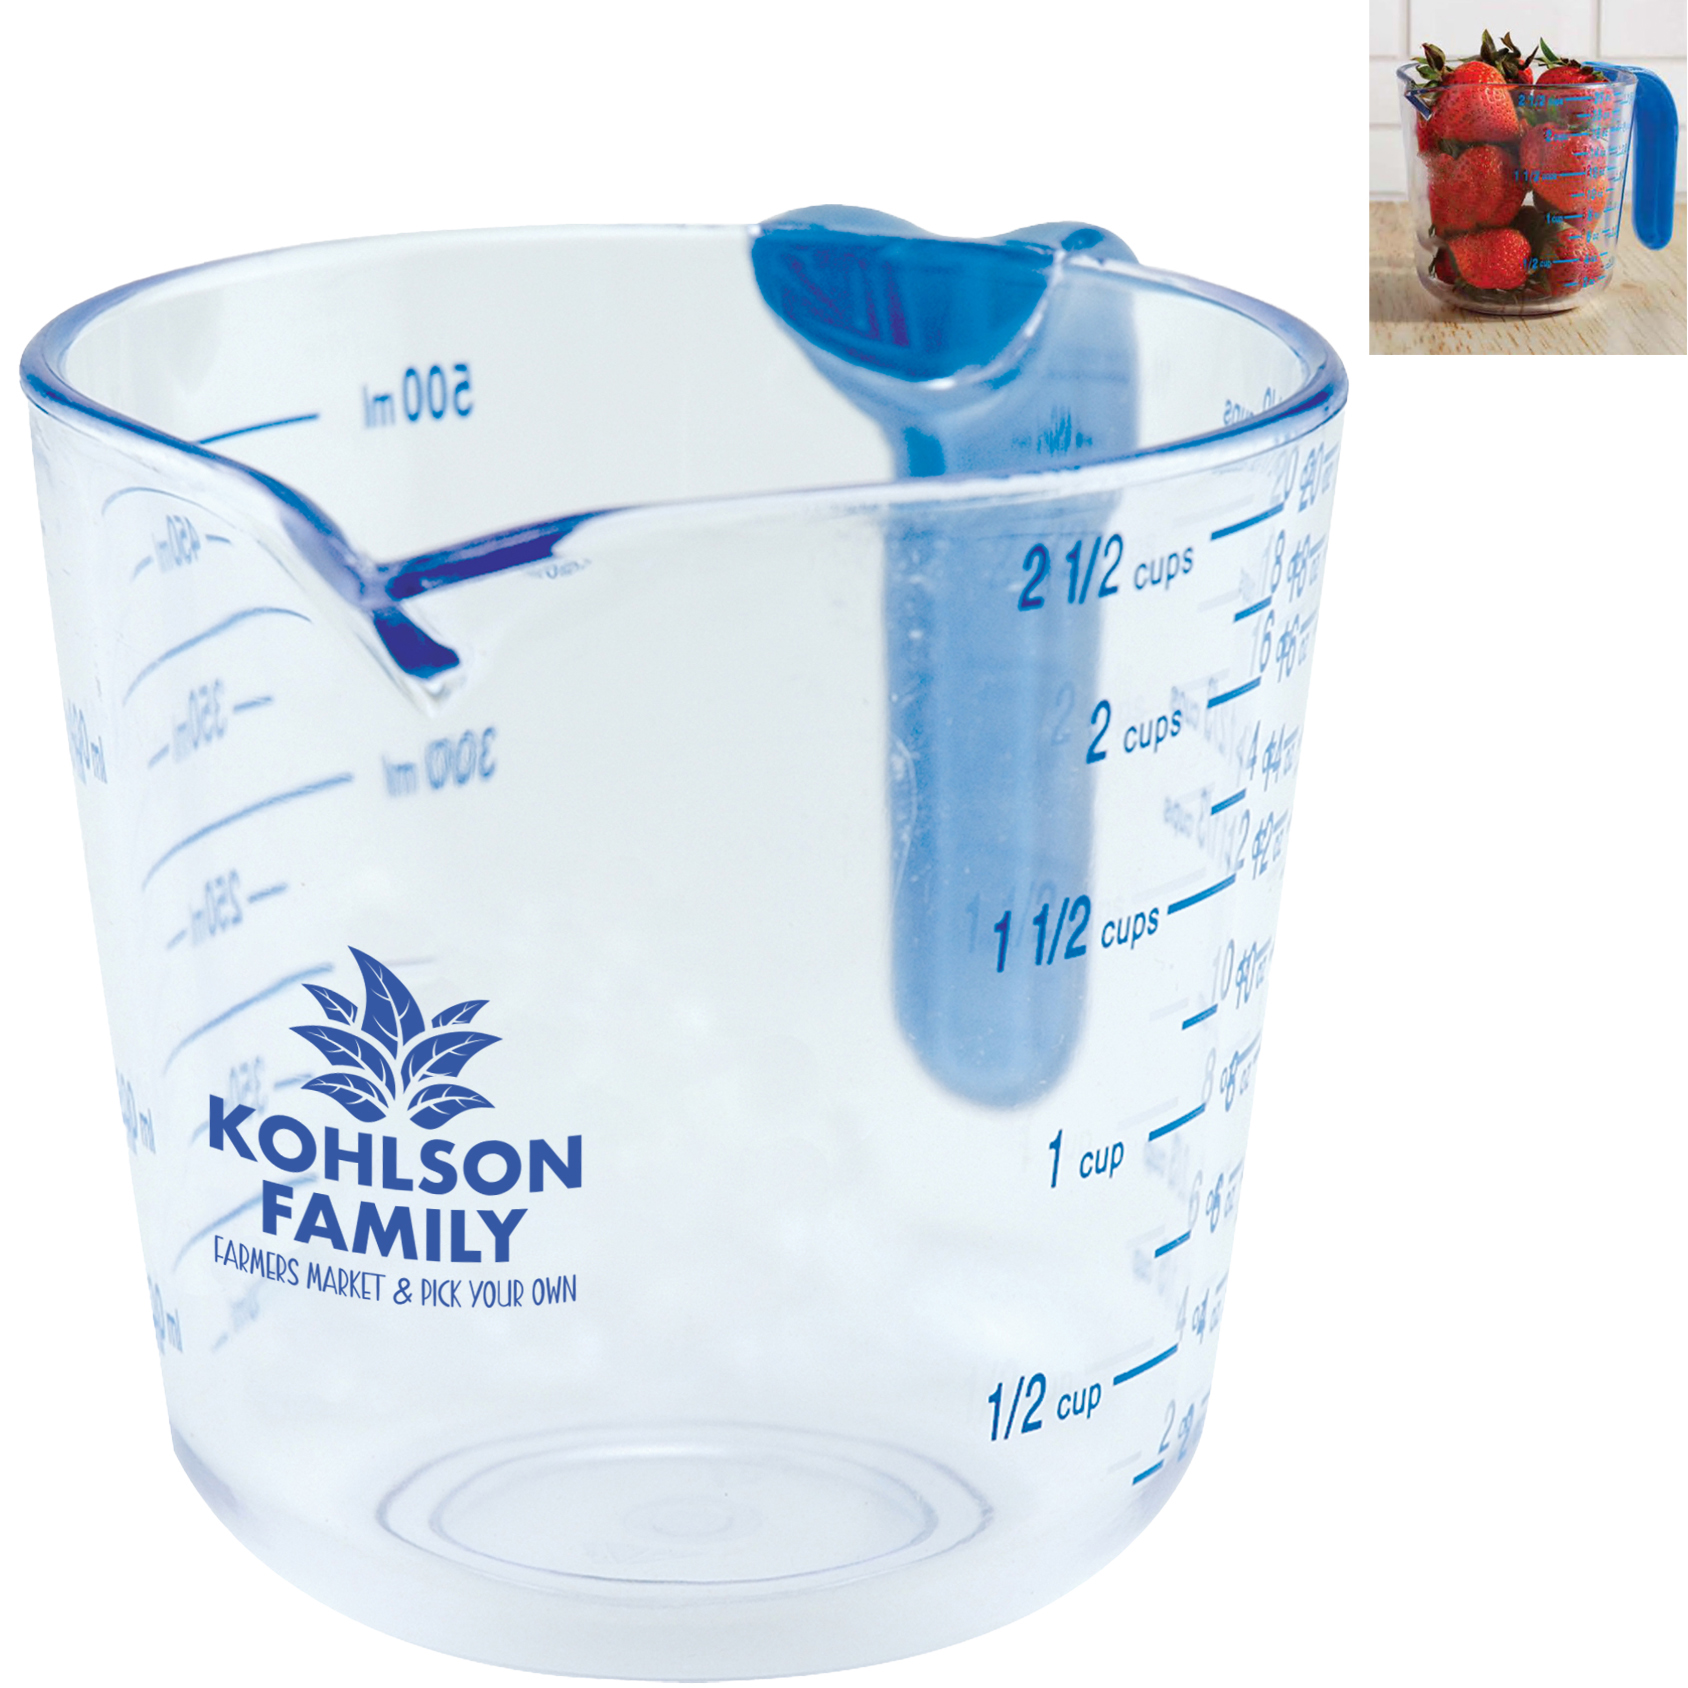 4 oz Capacity Custom Measuring Glass  Promotional Product Ideas by